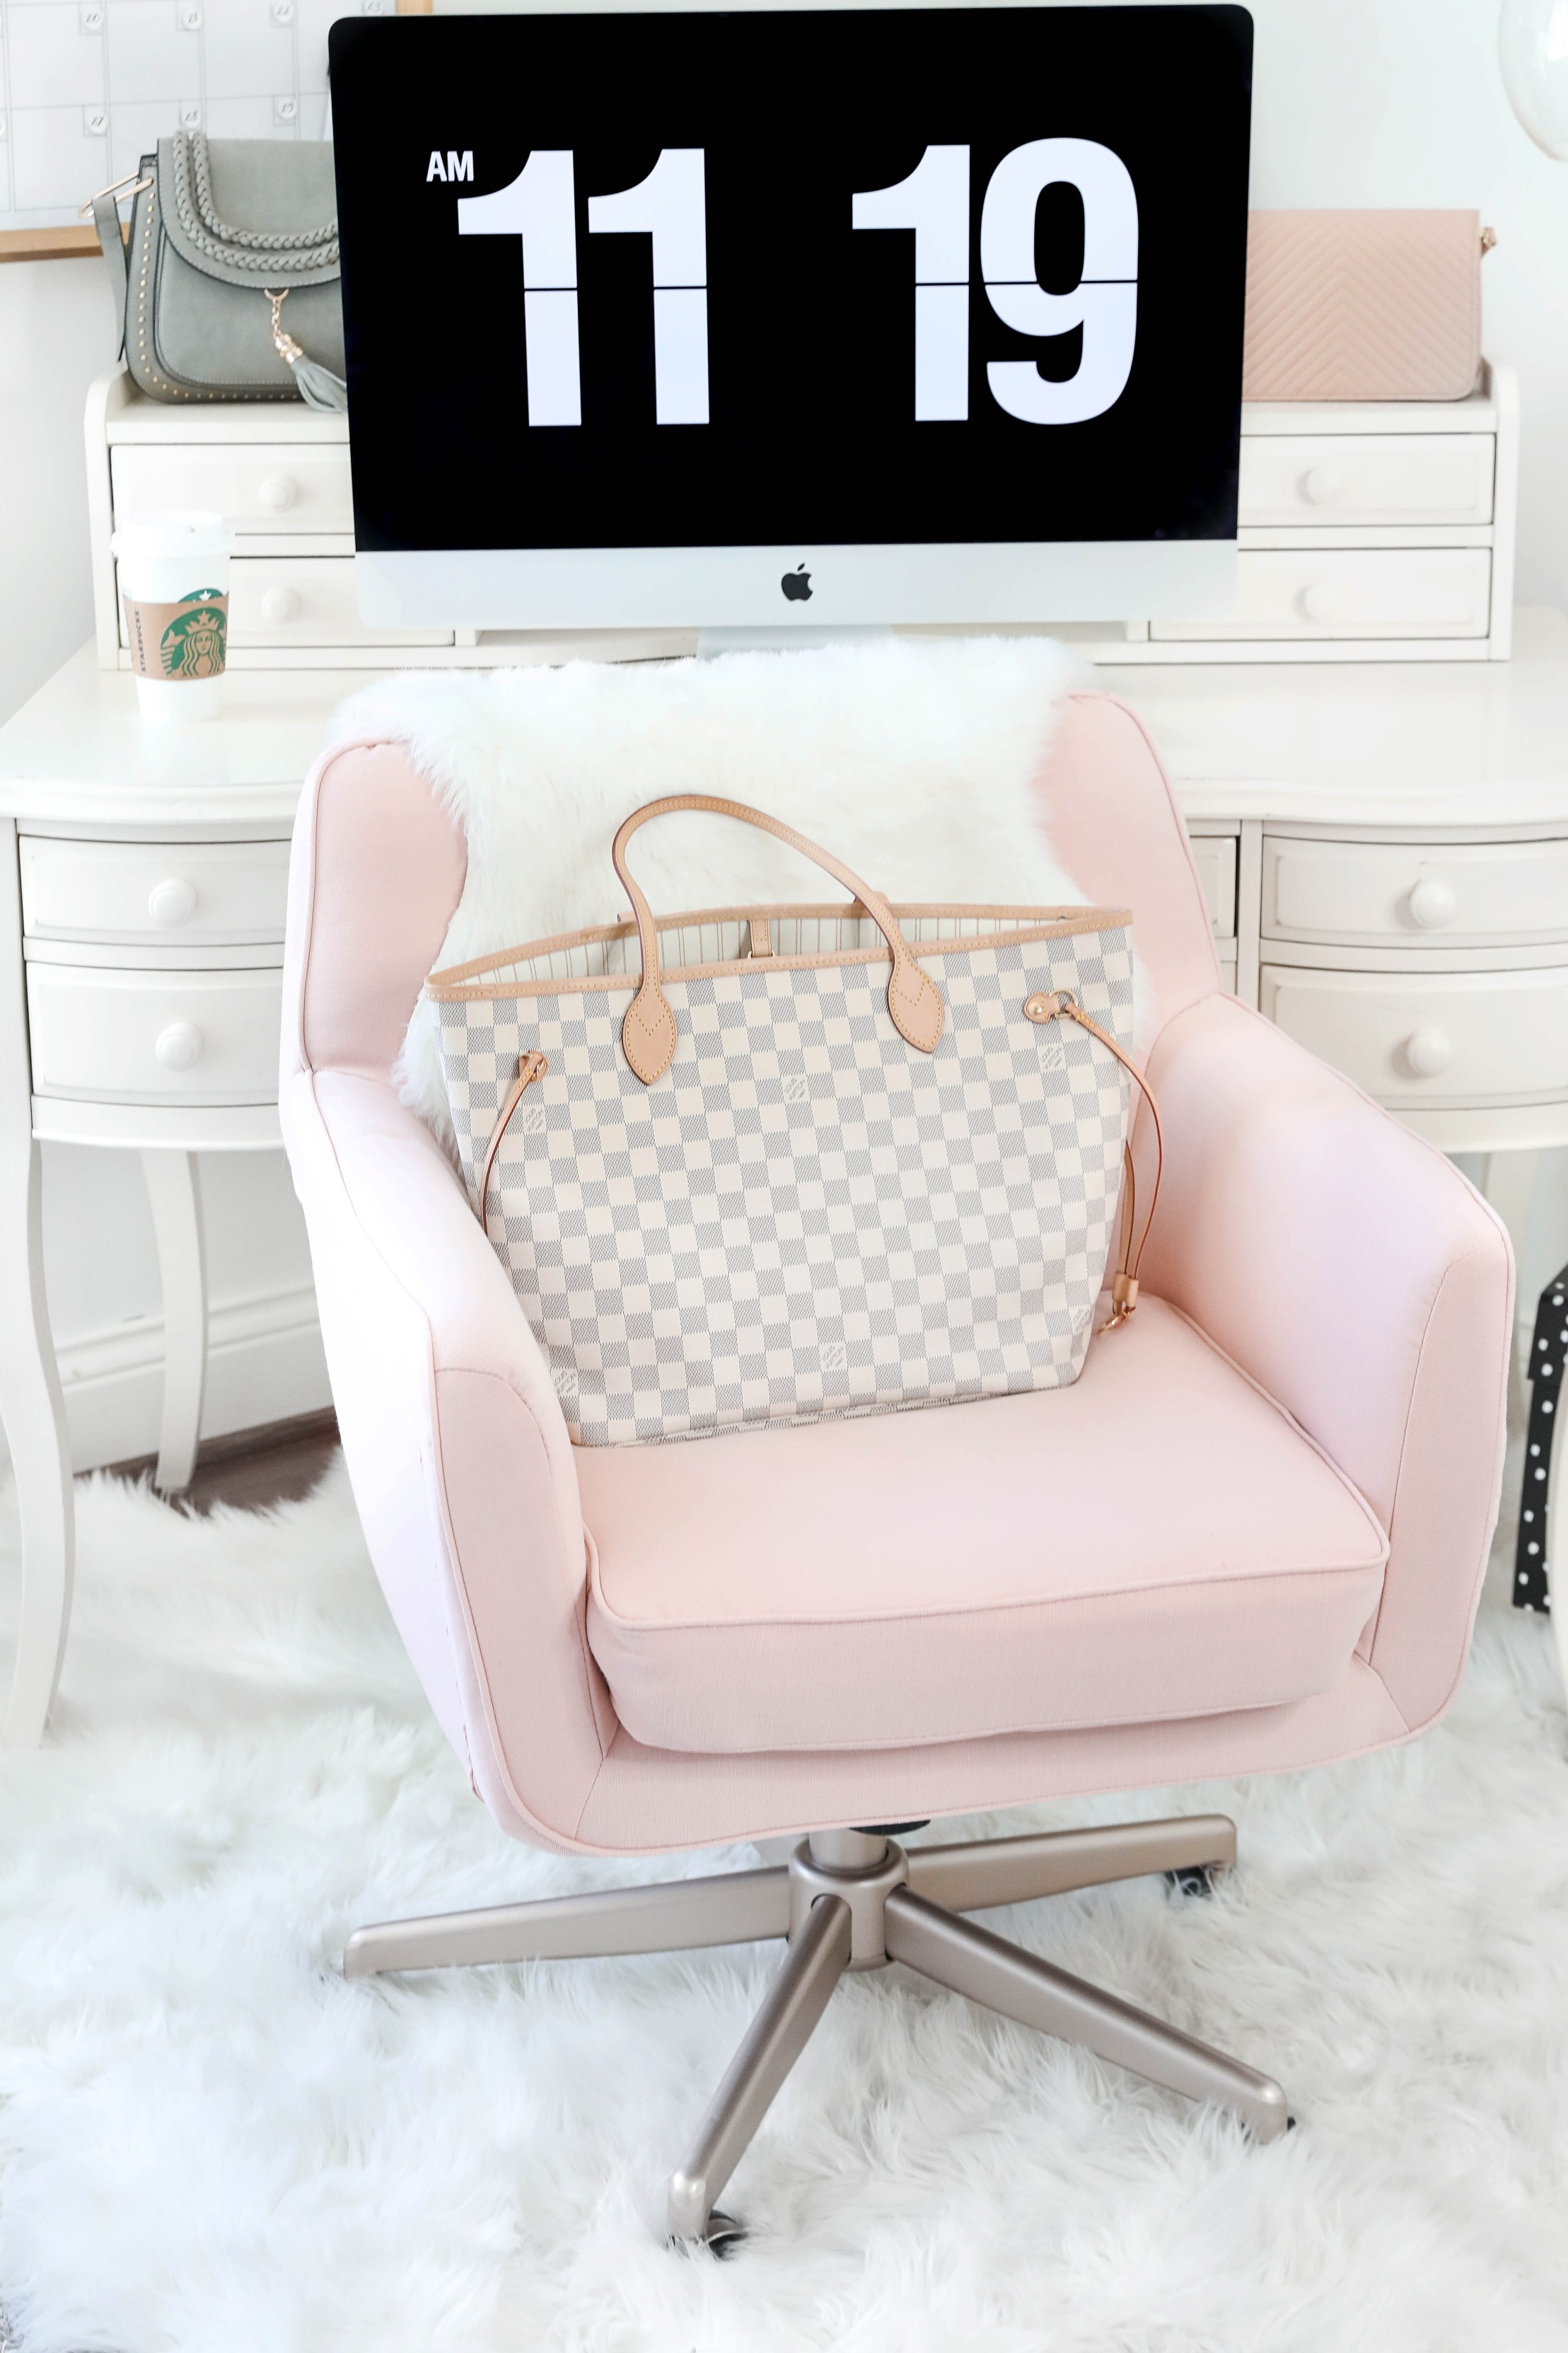 Office tour! Ultimate desk goals for the girl boss! I love this super comfy pink desk chair! I had been looking for a new chair and found the perfect one! The space looks so cute with my faux sheep fuzzy rug, and all the white, black, gold and pink. This is also the cutest gold dry erase calendar! Details on fashion and lifestyle blog daily dose of charm by lauren lindmark